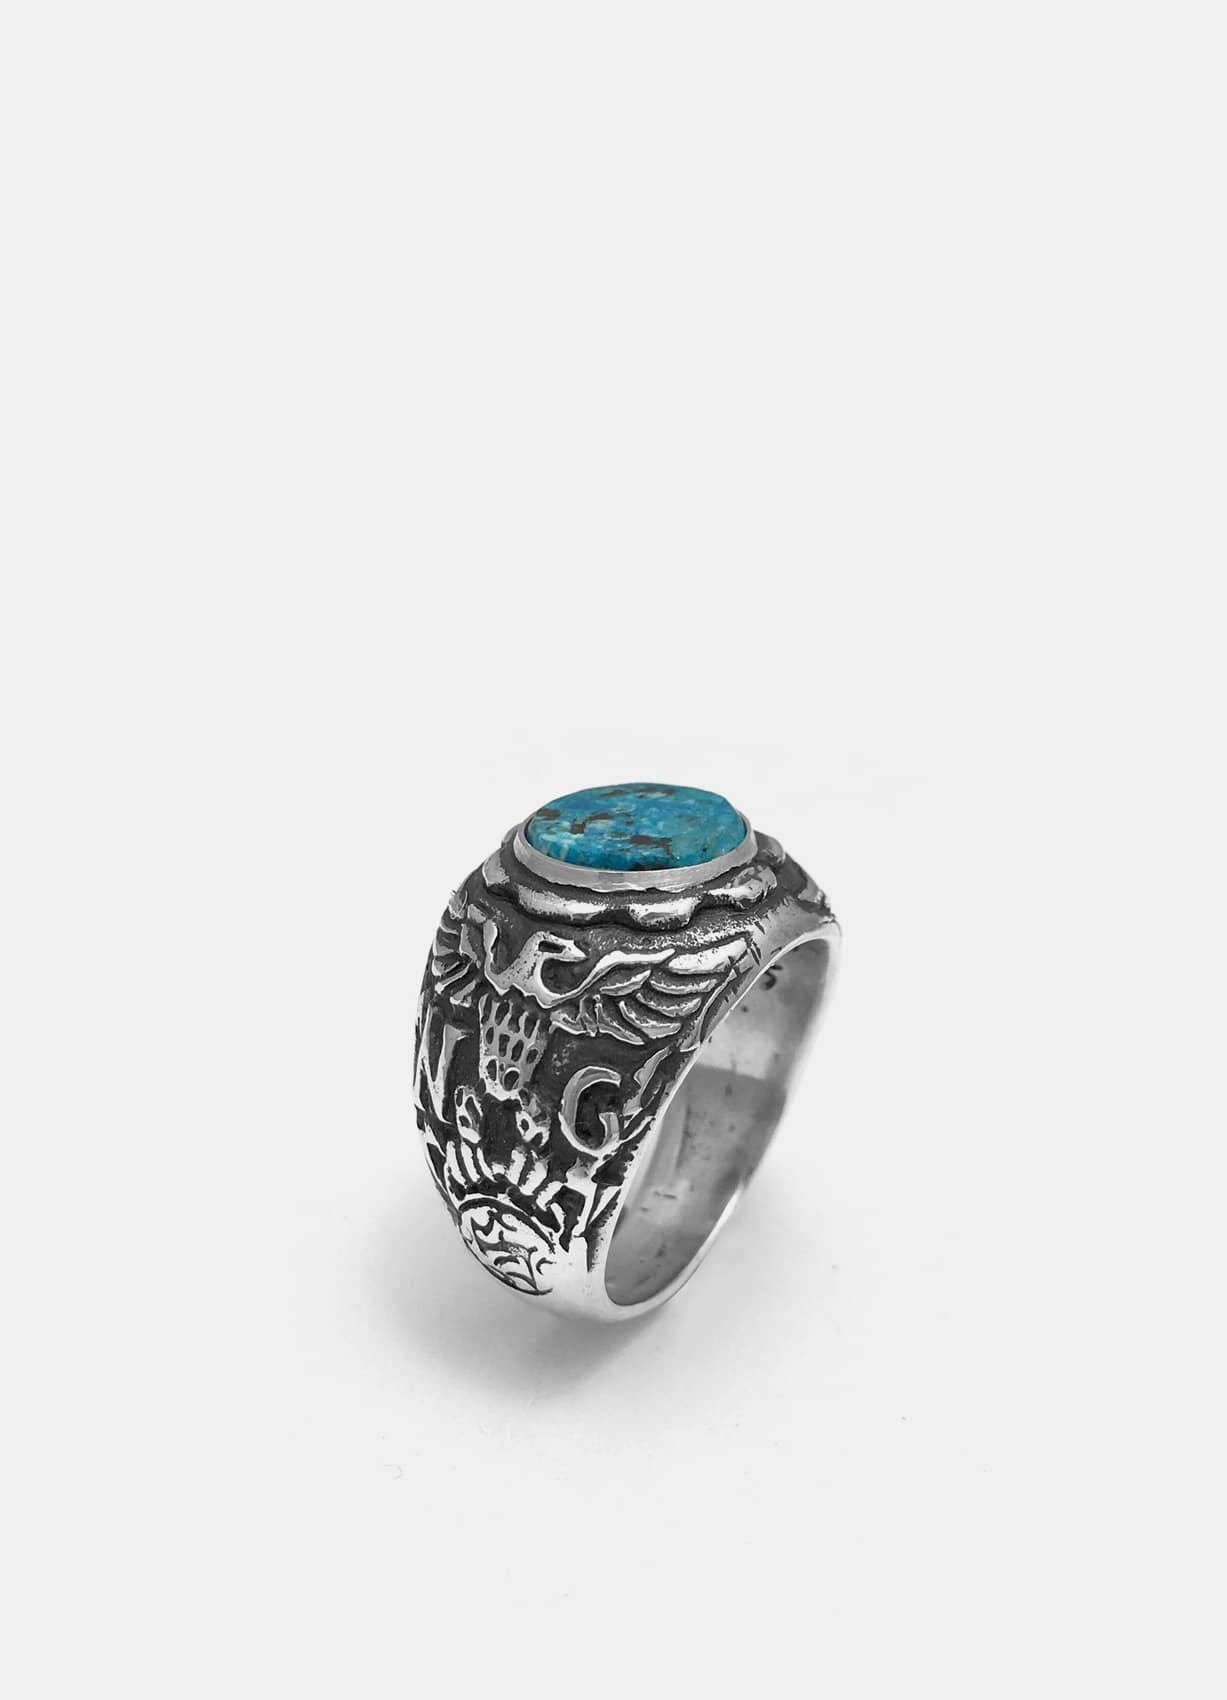 Eagle Crest Silver Ring w/Turquoise